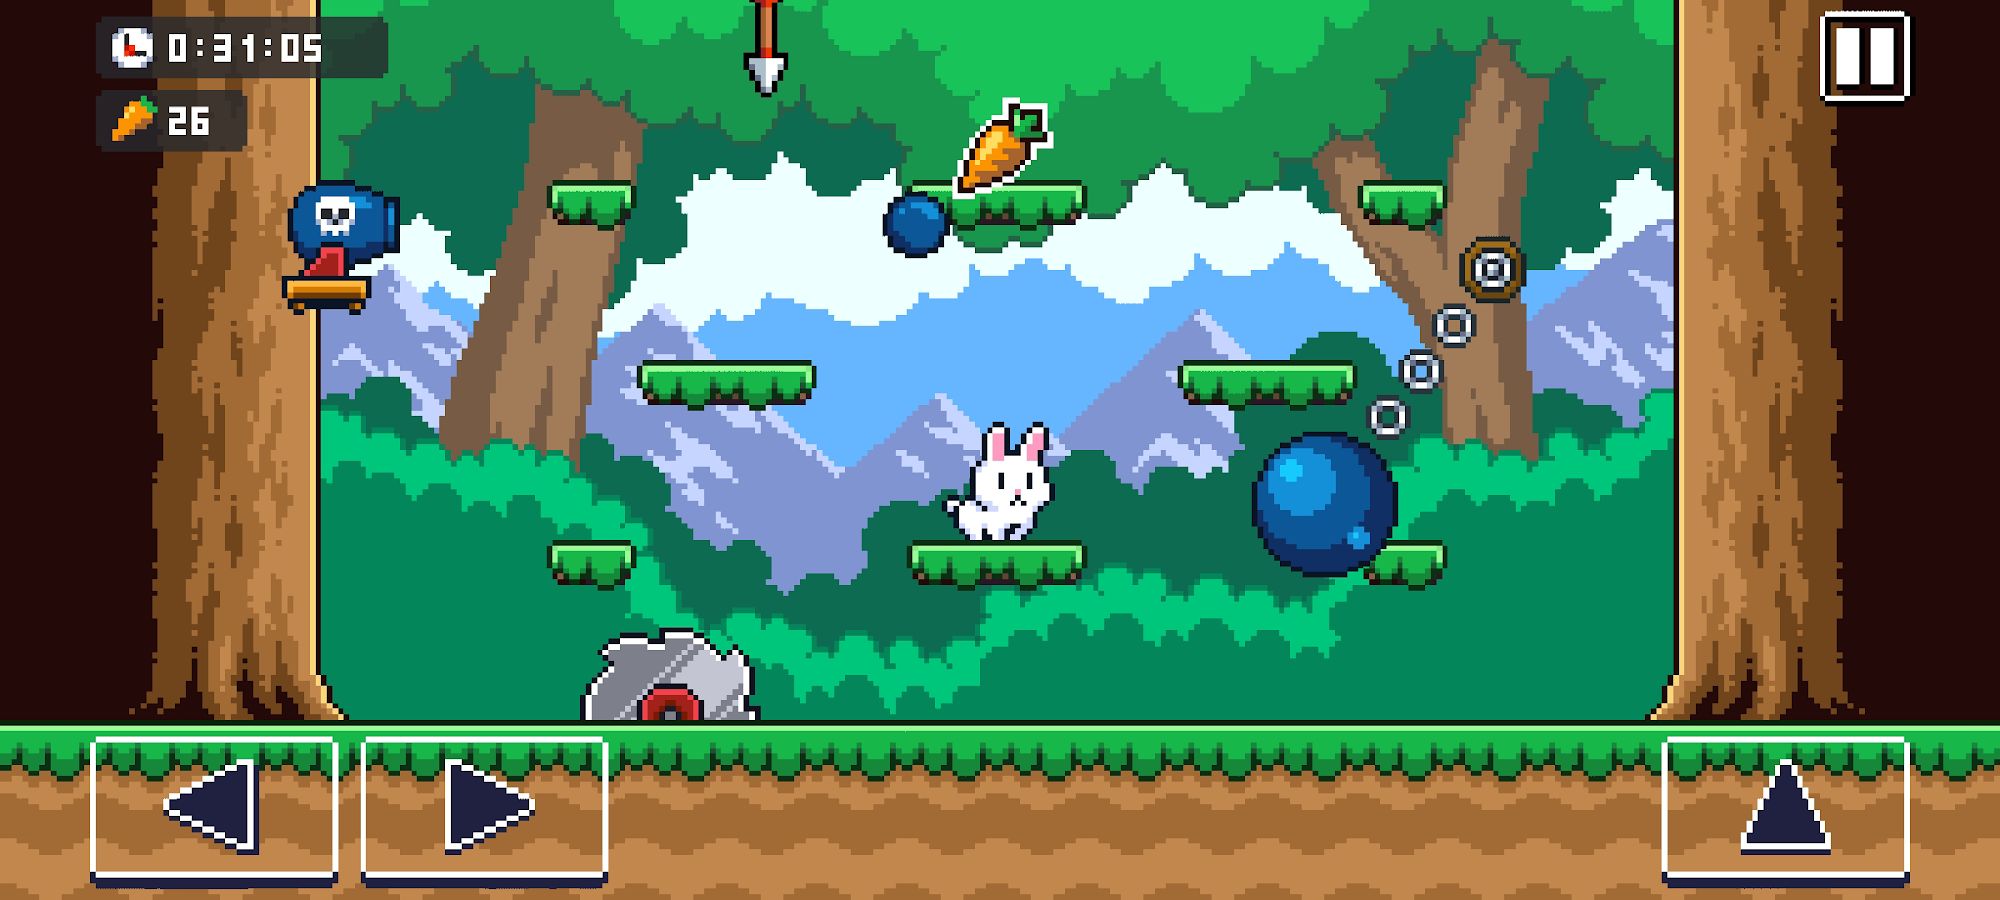 Full version of Android Reaction game apk Poor Bunny! for tablet and phone.